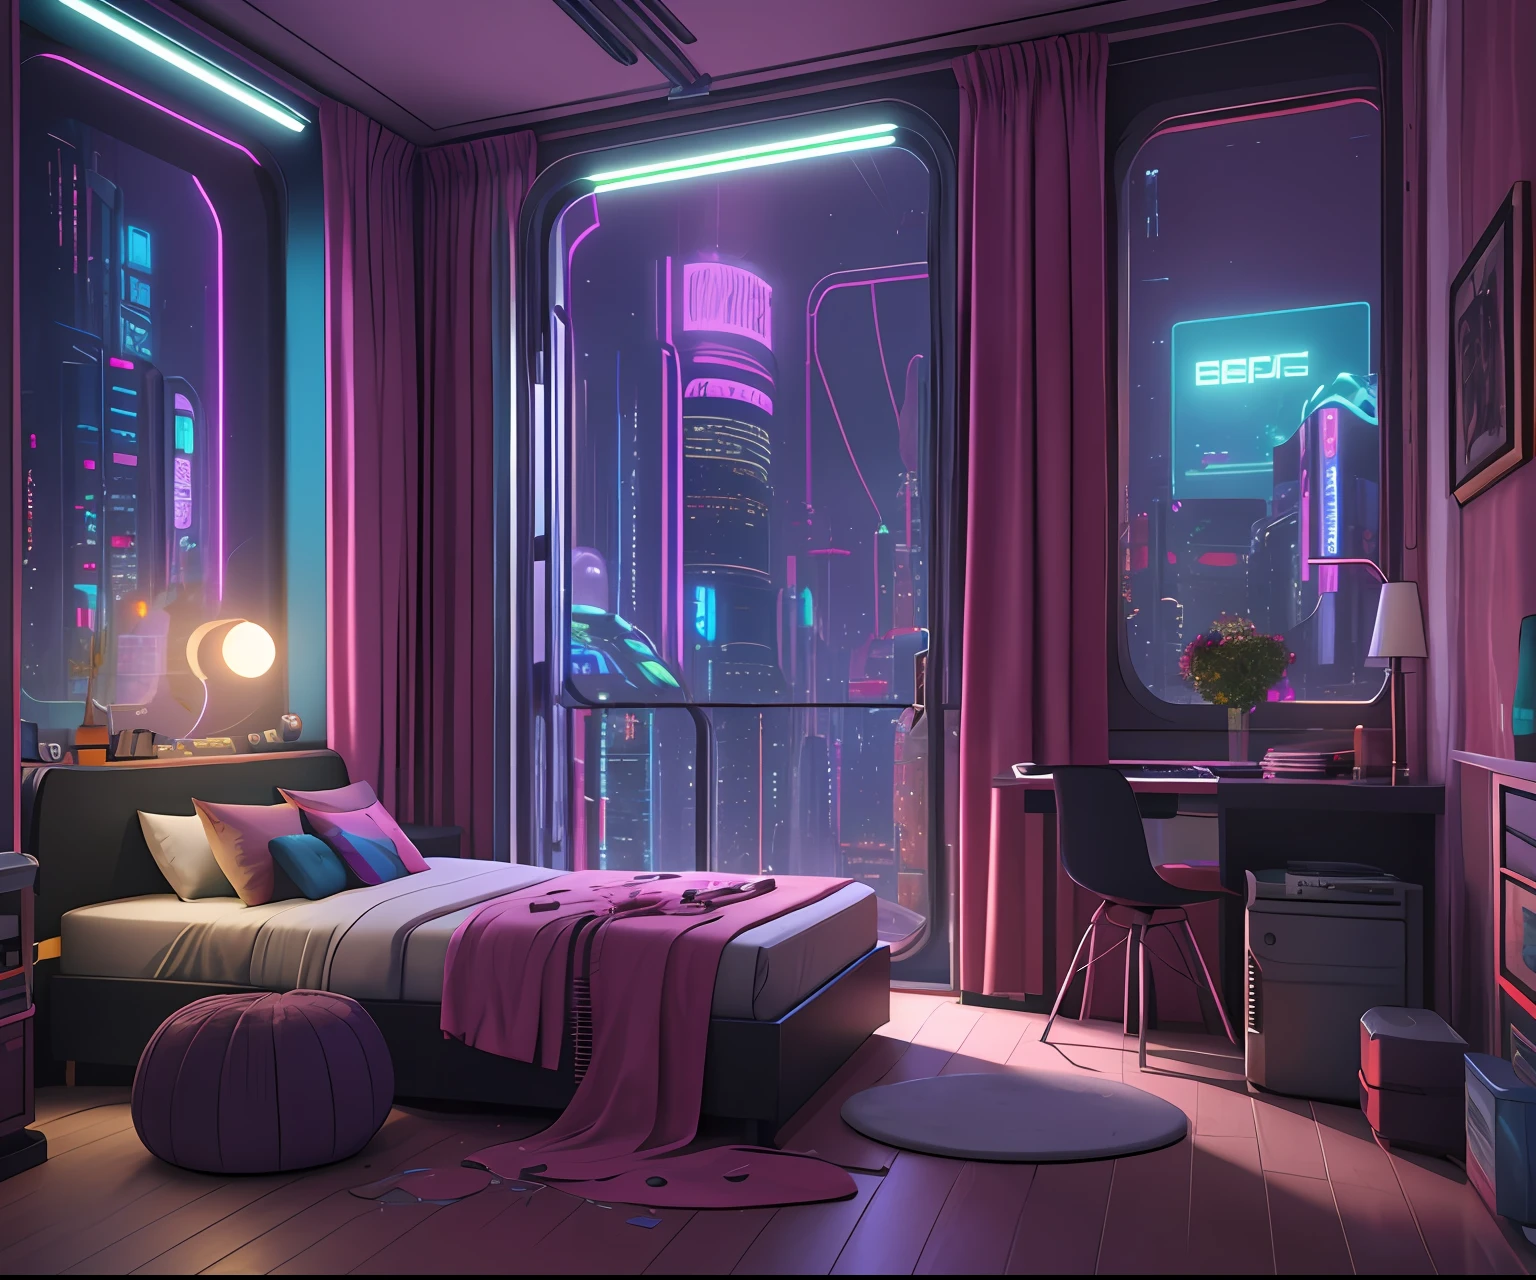 there is a bed with a cyberpunk fantasy city view in the background, ((historical bedroom at night)), colorful realistic cyberpunk dreamscape, cyberpunk messy bedroom, cyberpunk steampunk bedroom, 3 d render beeple, the cyberpunk apartment, cyberpunk apartment, beeple rendering, arstation and beeple highly, in a cyberpunk themed room, in fantasy sci - fi city, inspired by Beeple, 8k, artstation